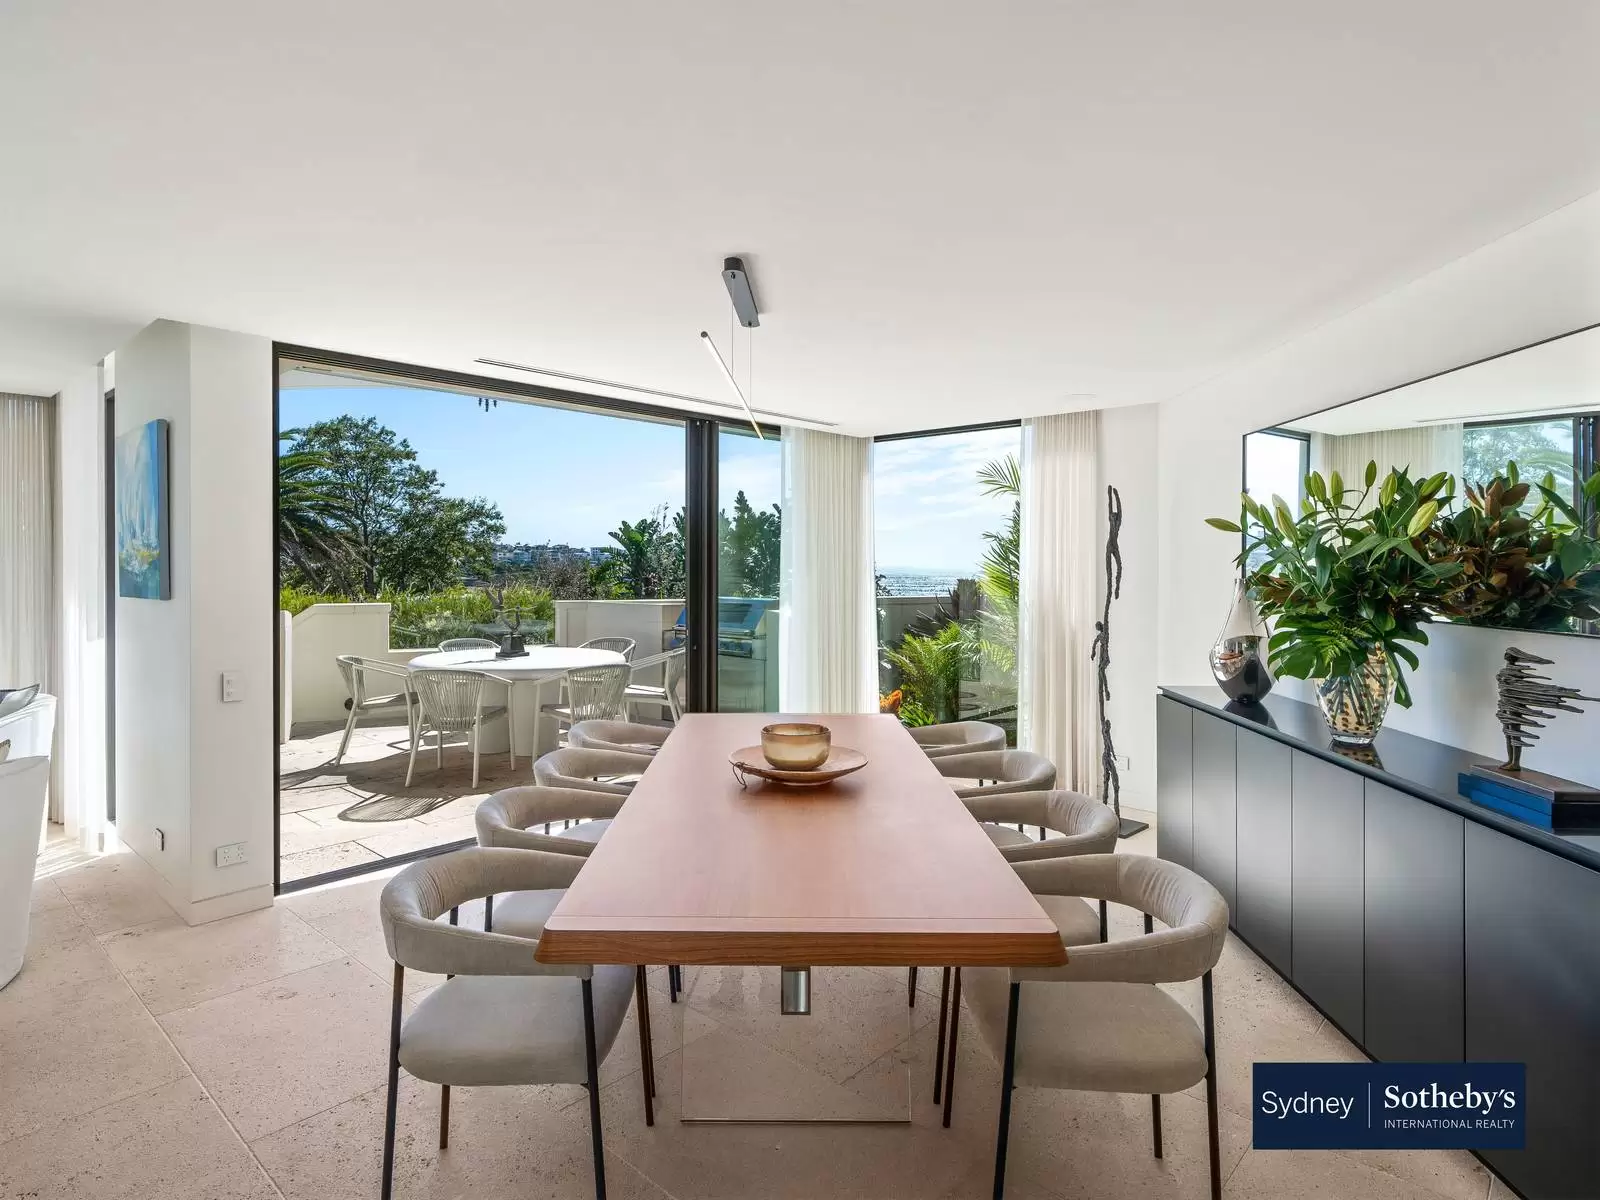 504a Bronte Road, Bronte For Lease by Sydney Sotheby's International Realty - image 1